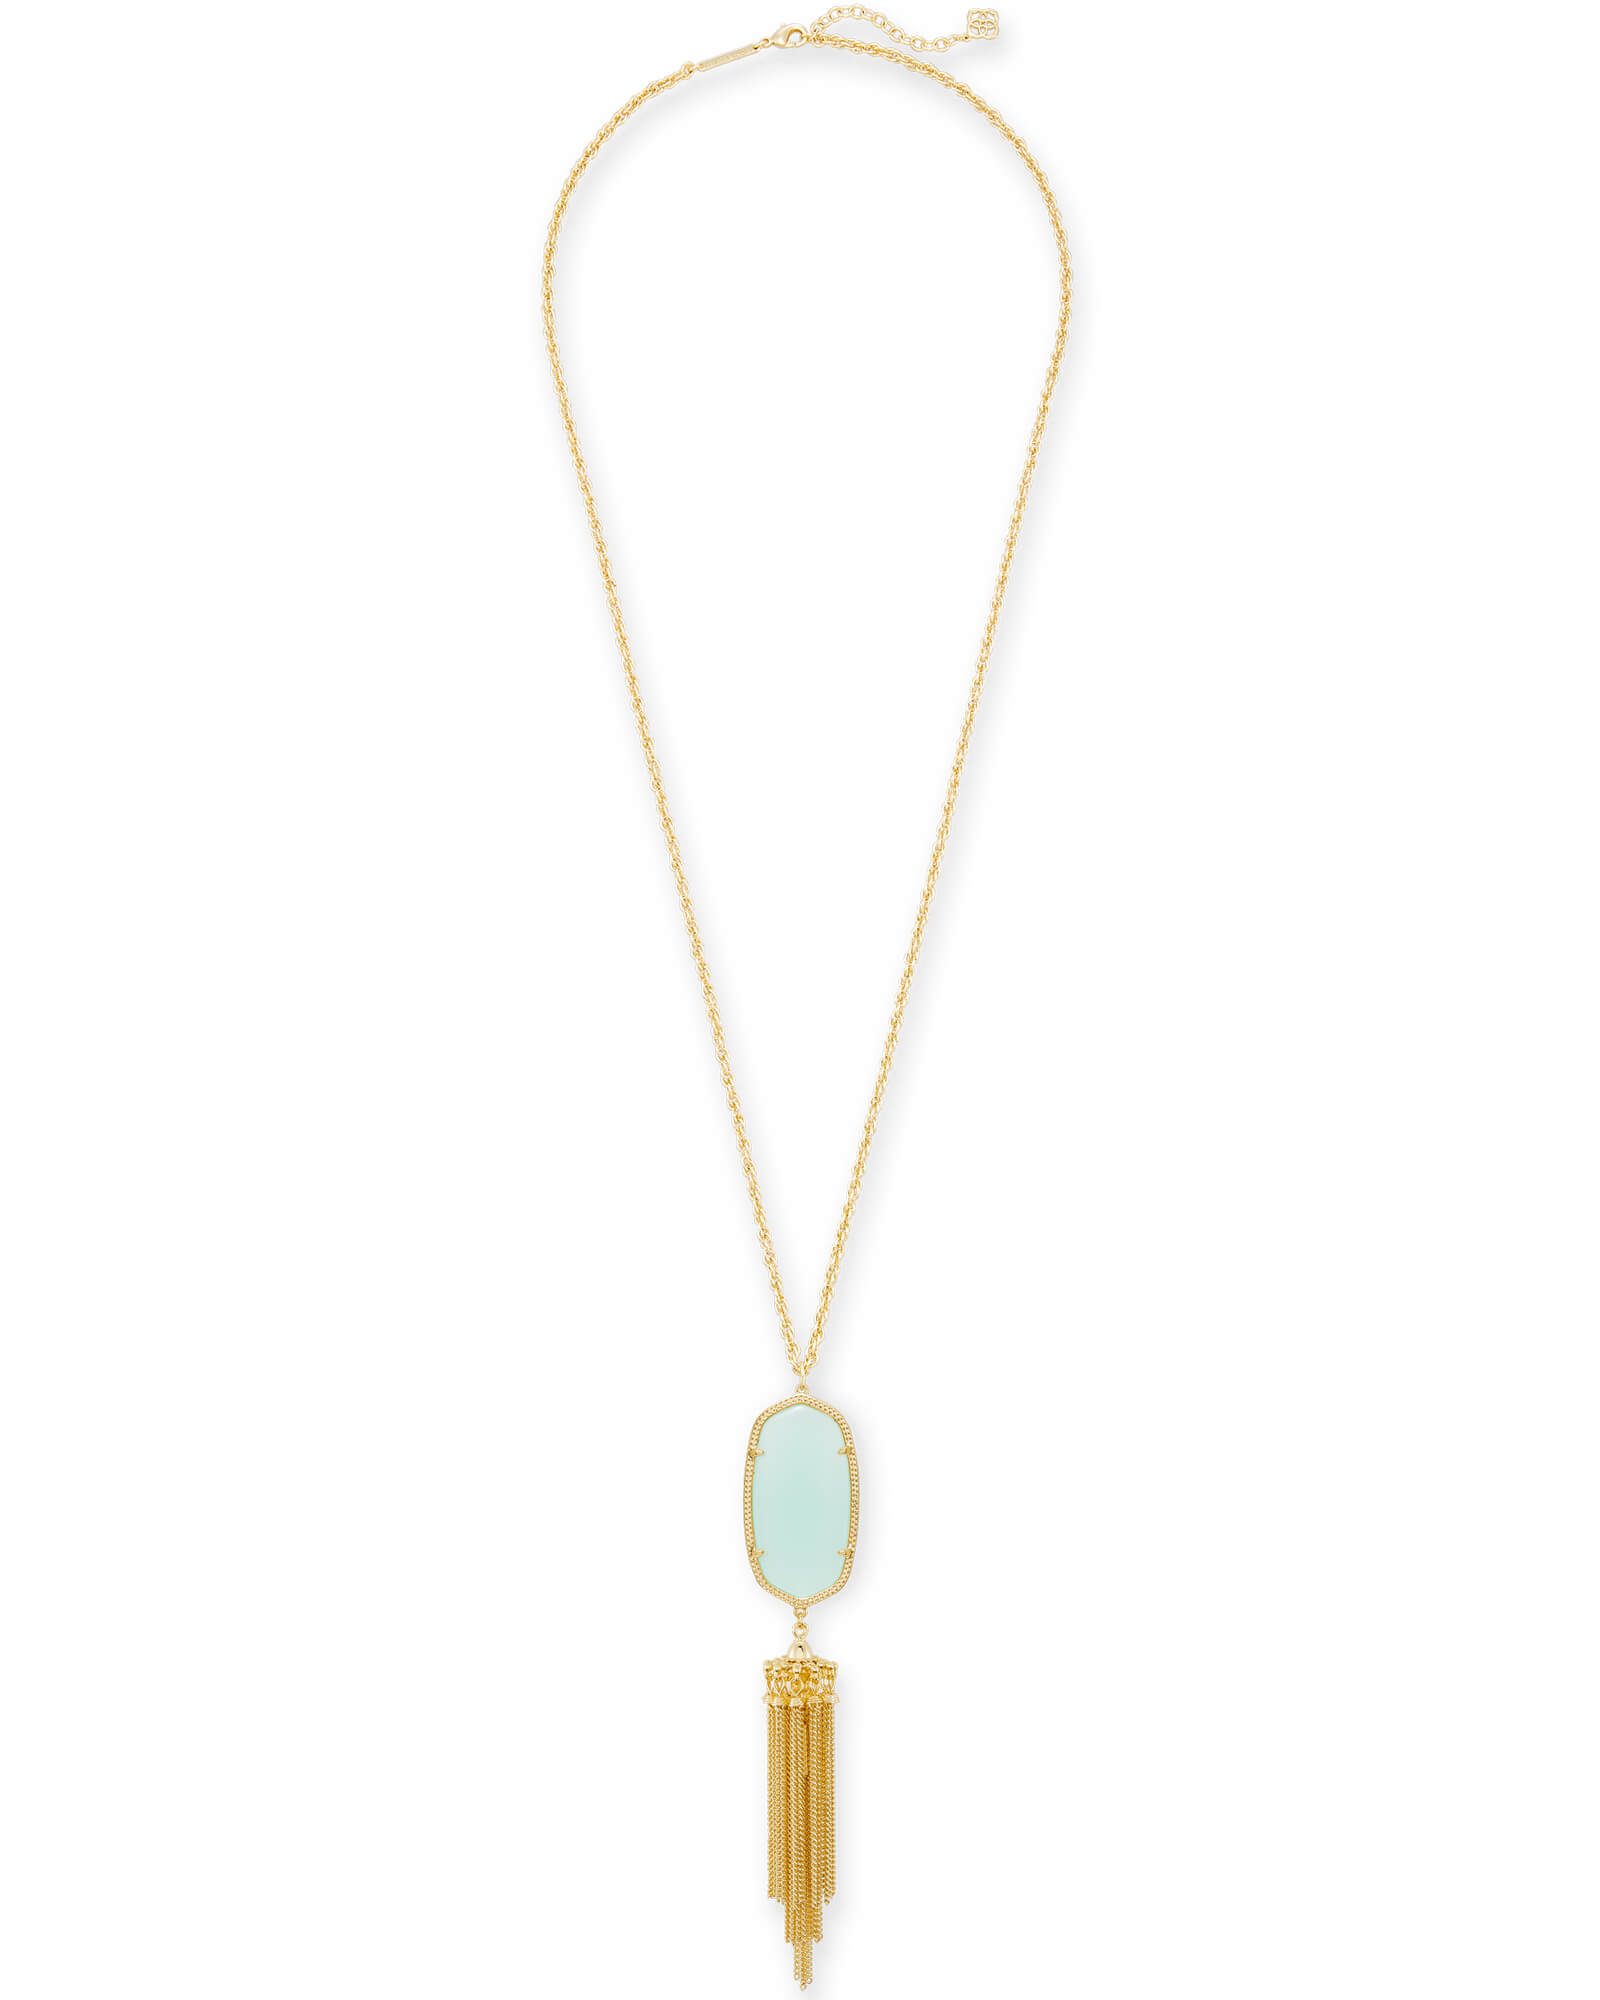 Rayne Gold Long Pendant Necklace in Chalcedony| Kendra Scott